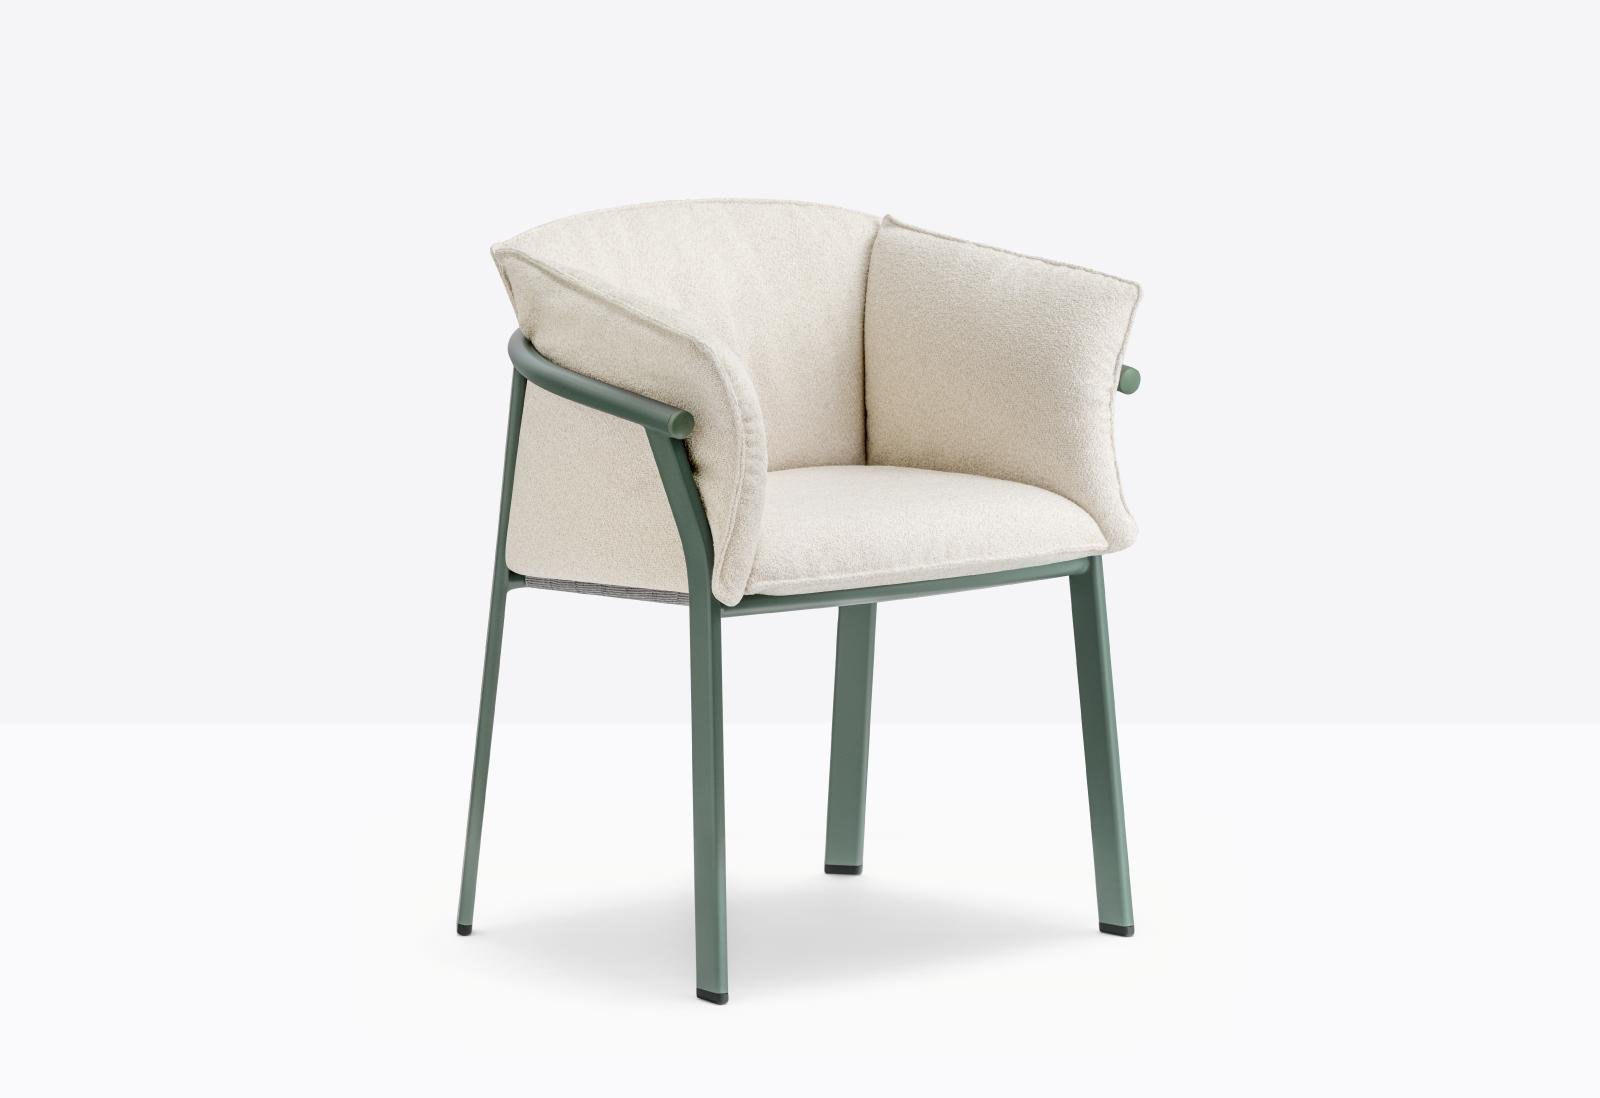 Lamorisse 3684 - 3685 Armchair from Pedrali, designed by CMP Design